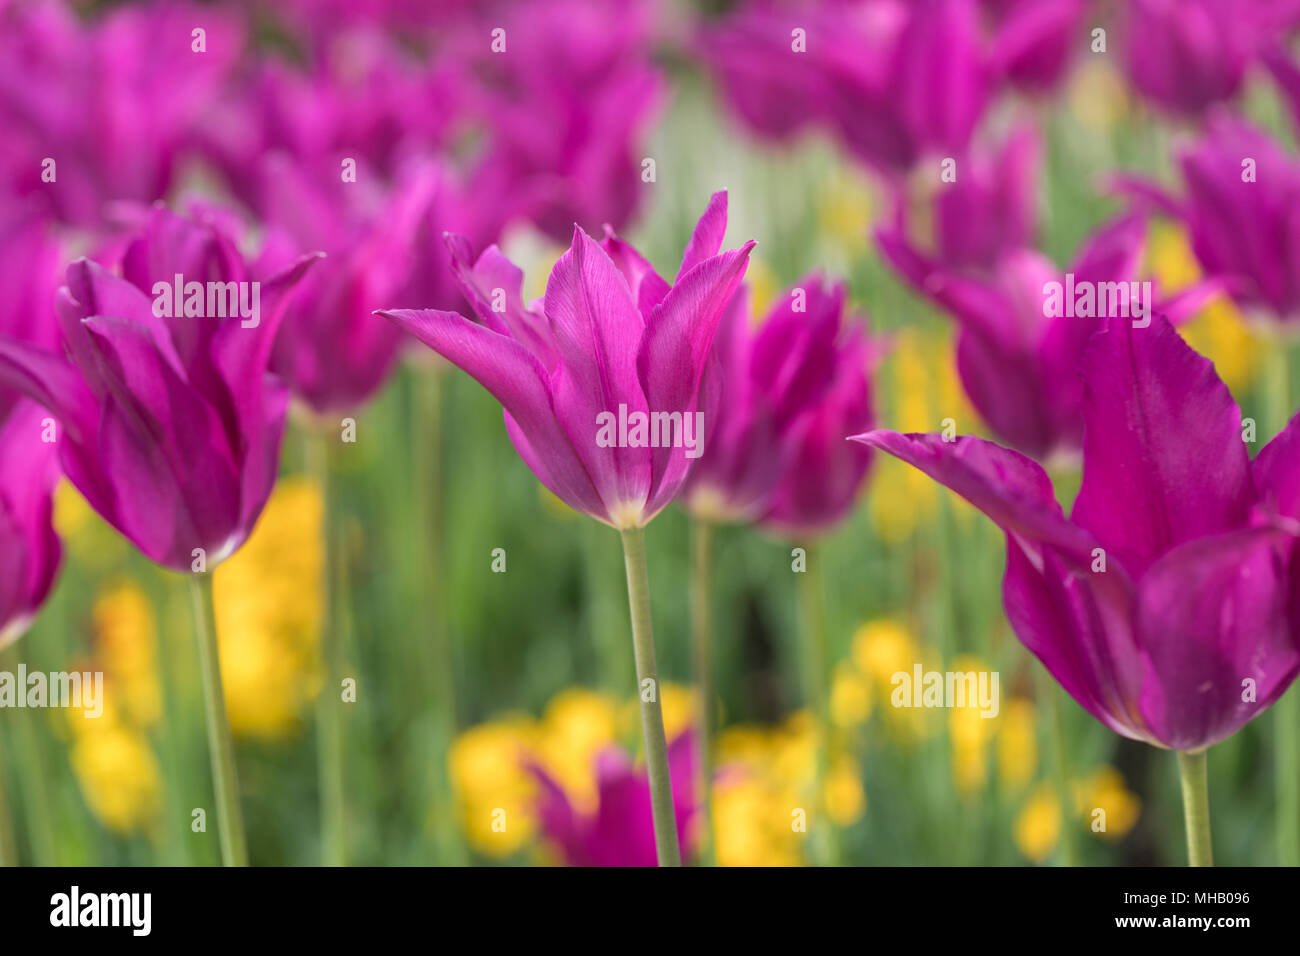 A colourful spring flower garden border of purple lily flowered tulips, against a blurred background, England, UK Stock Photo